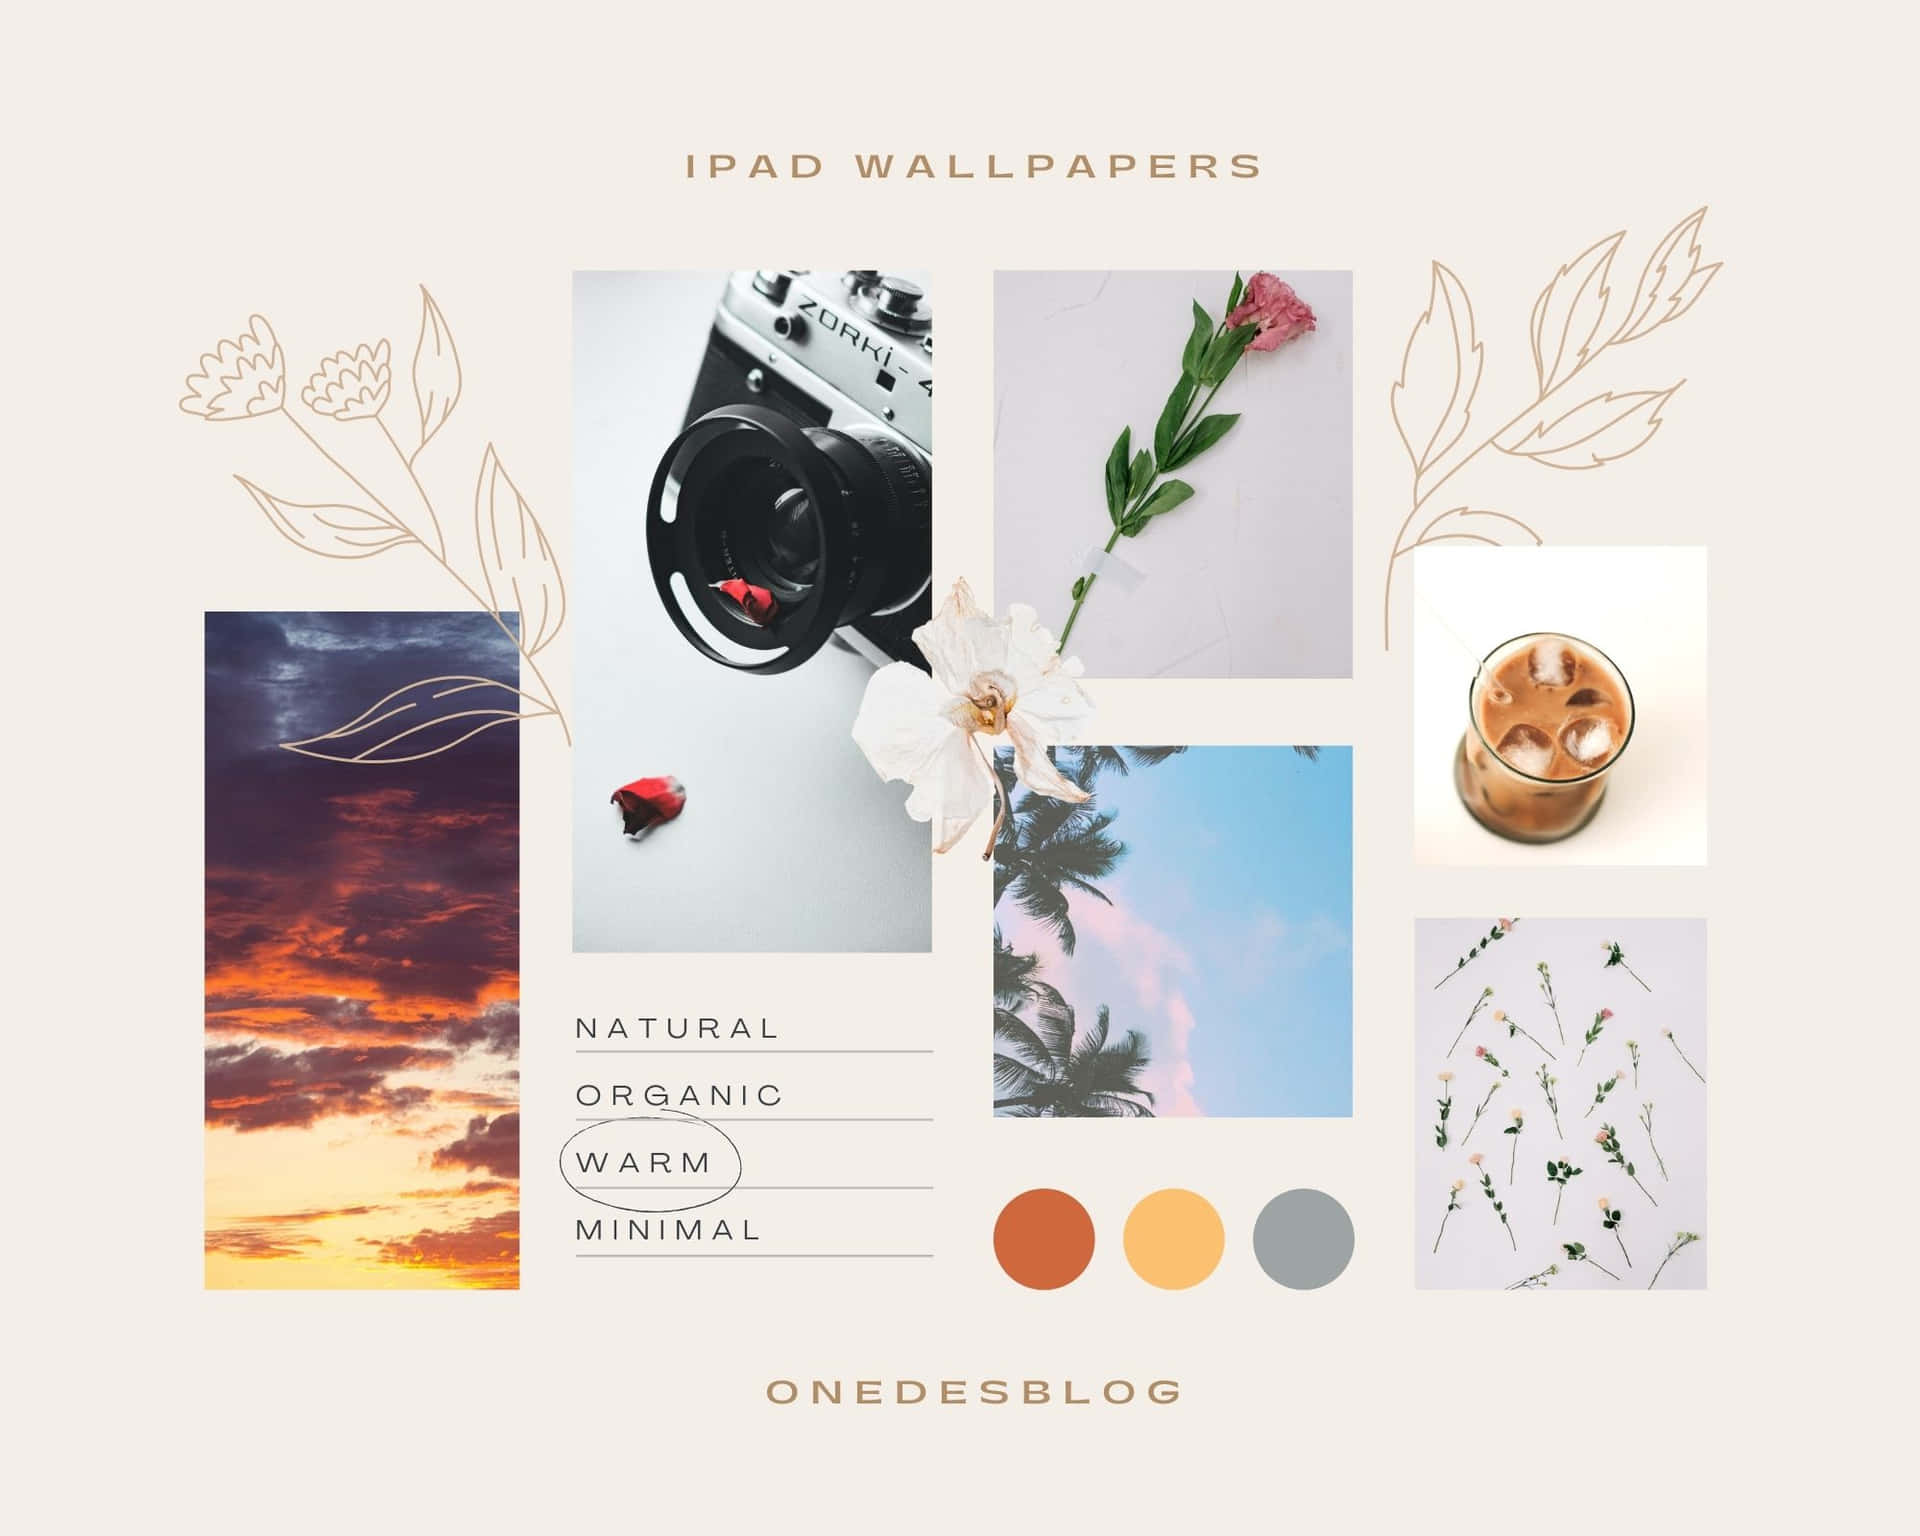 Let your creativity flourish and explore the aesthetic possibilities Wallpaper